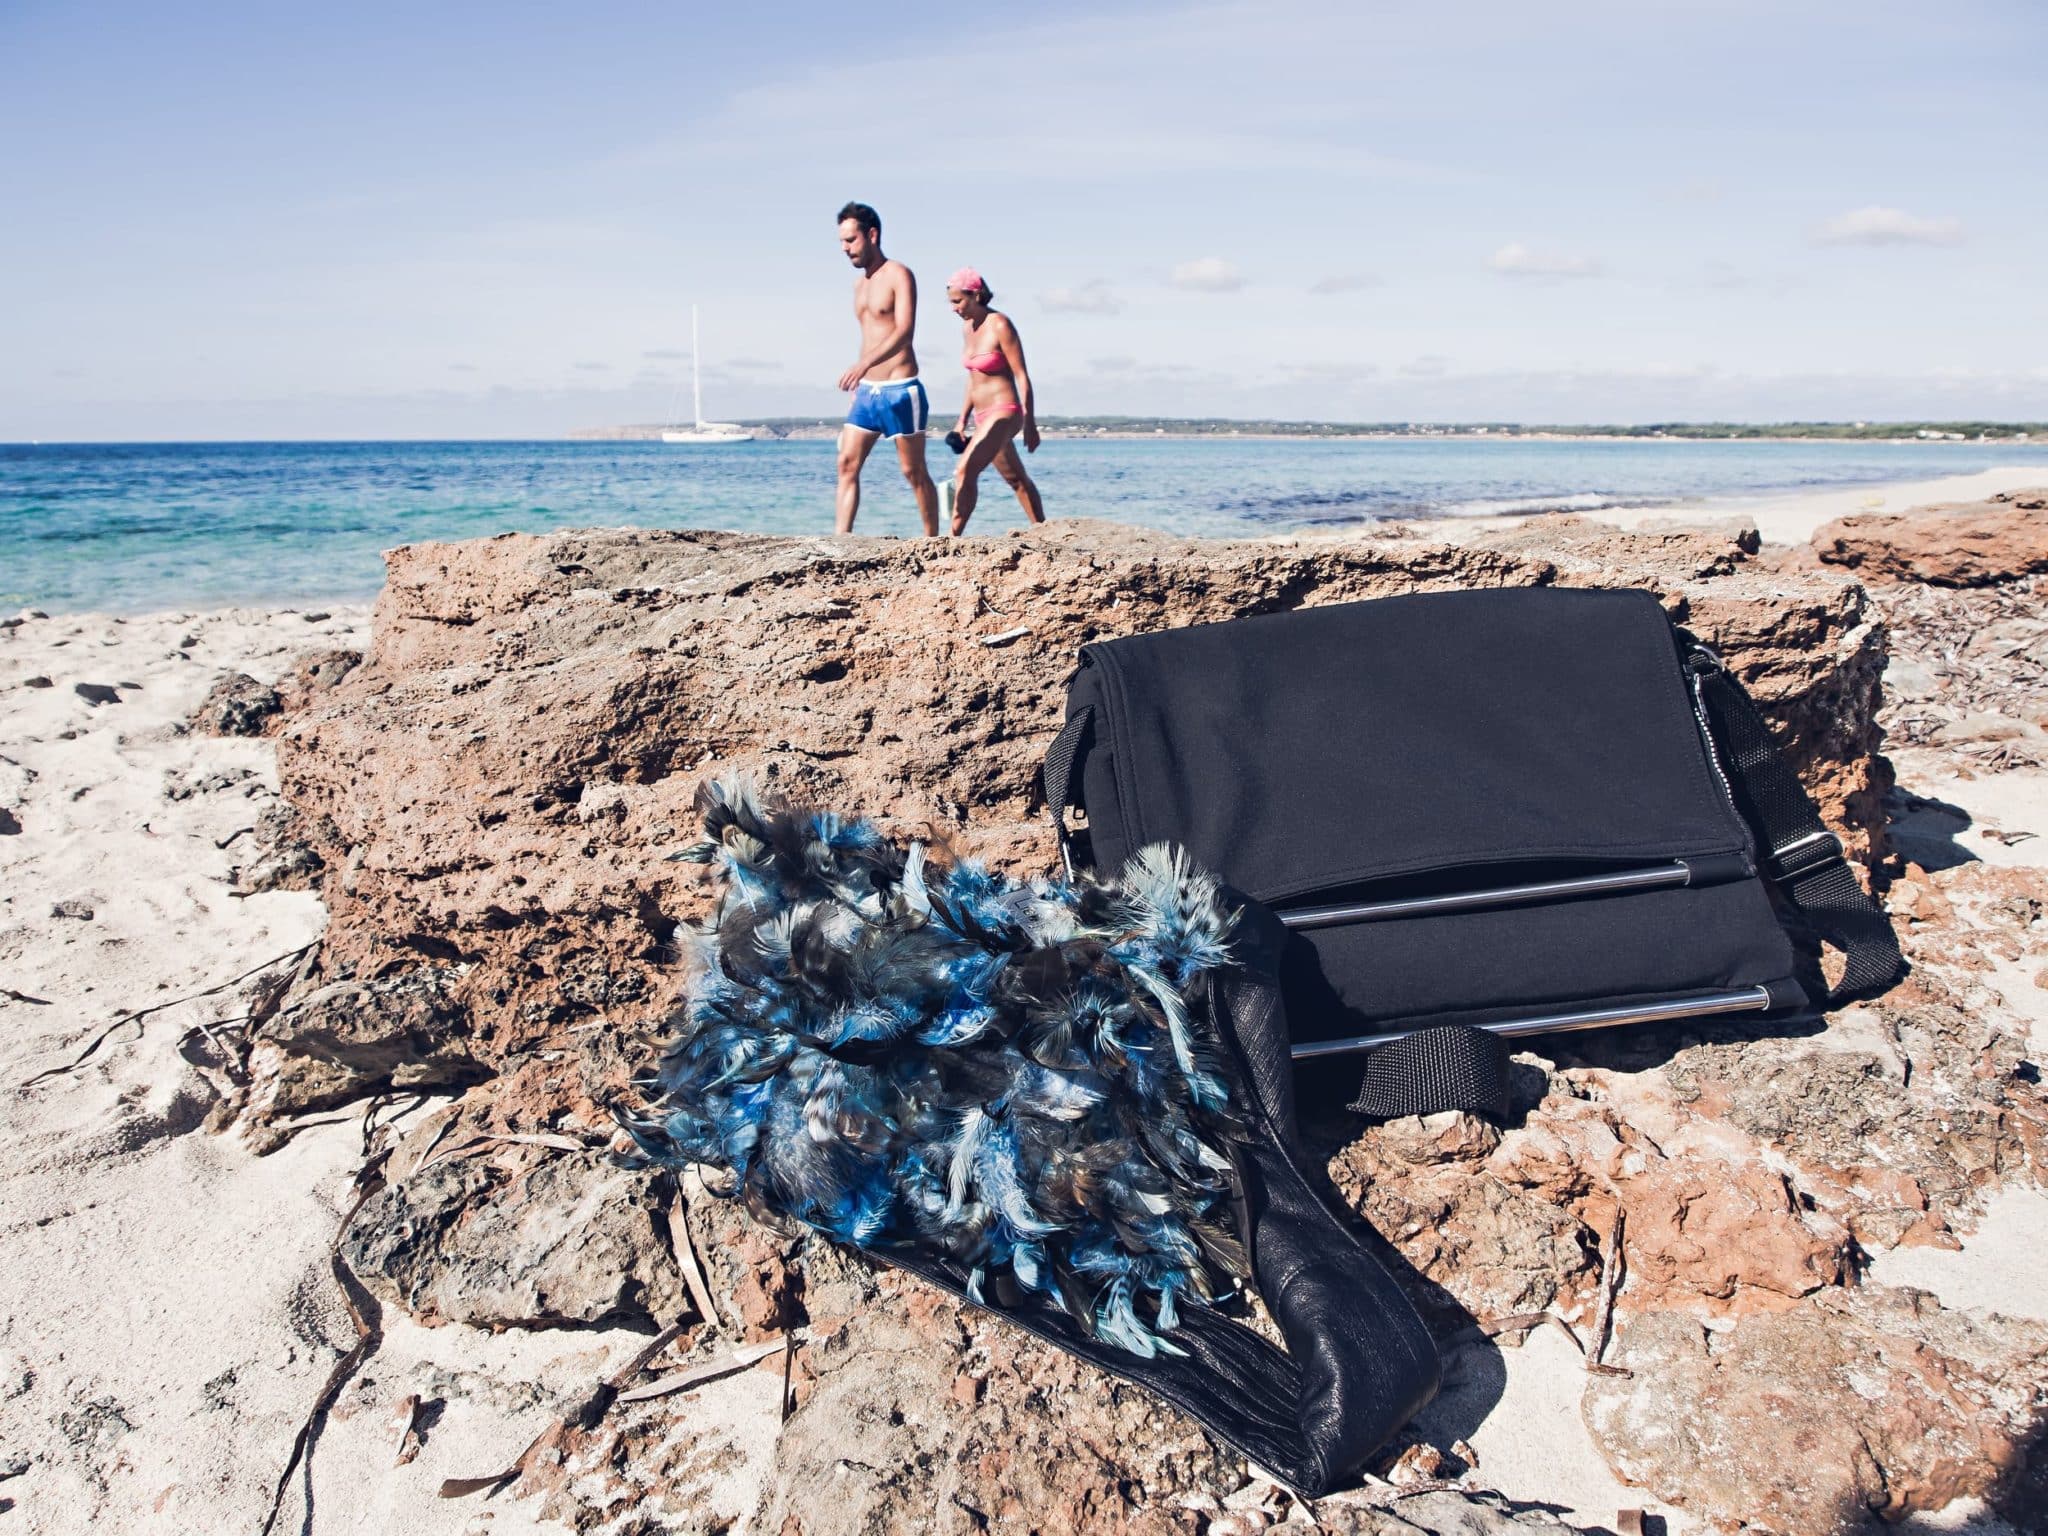 LiebJu Bags a travel love story - photographed by Holger Altgeld